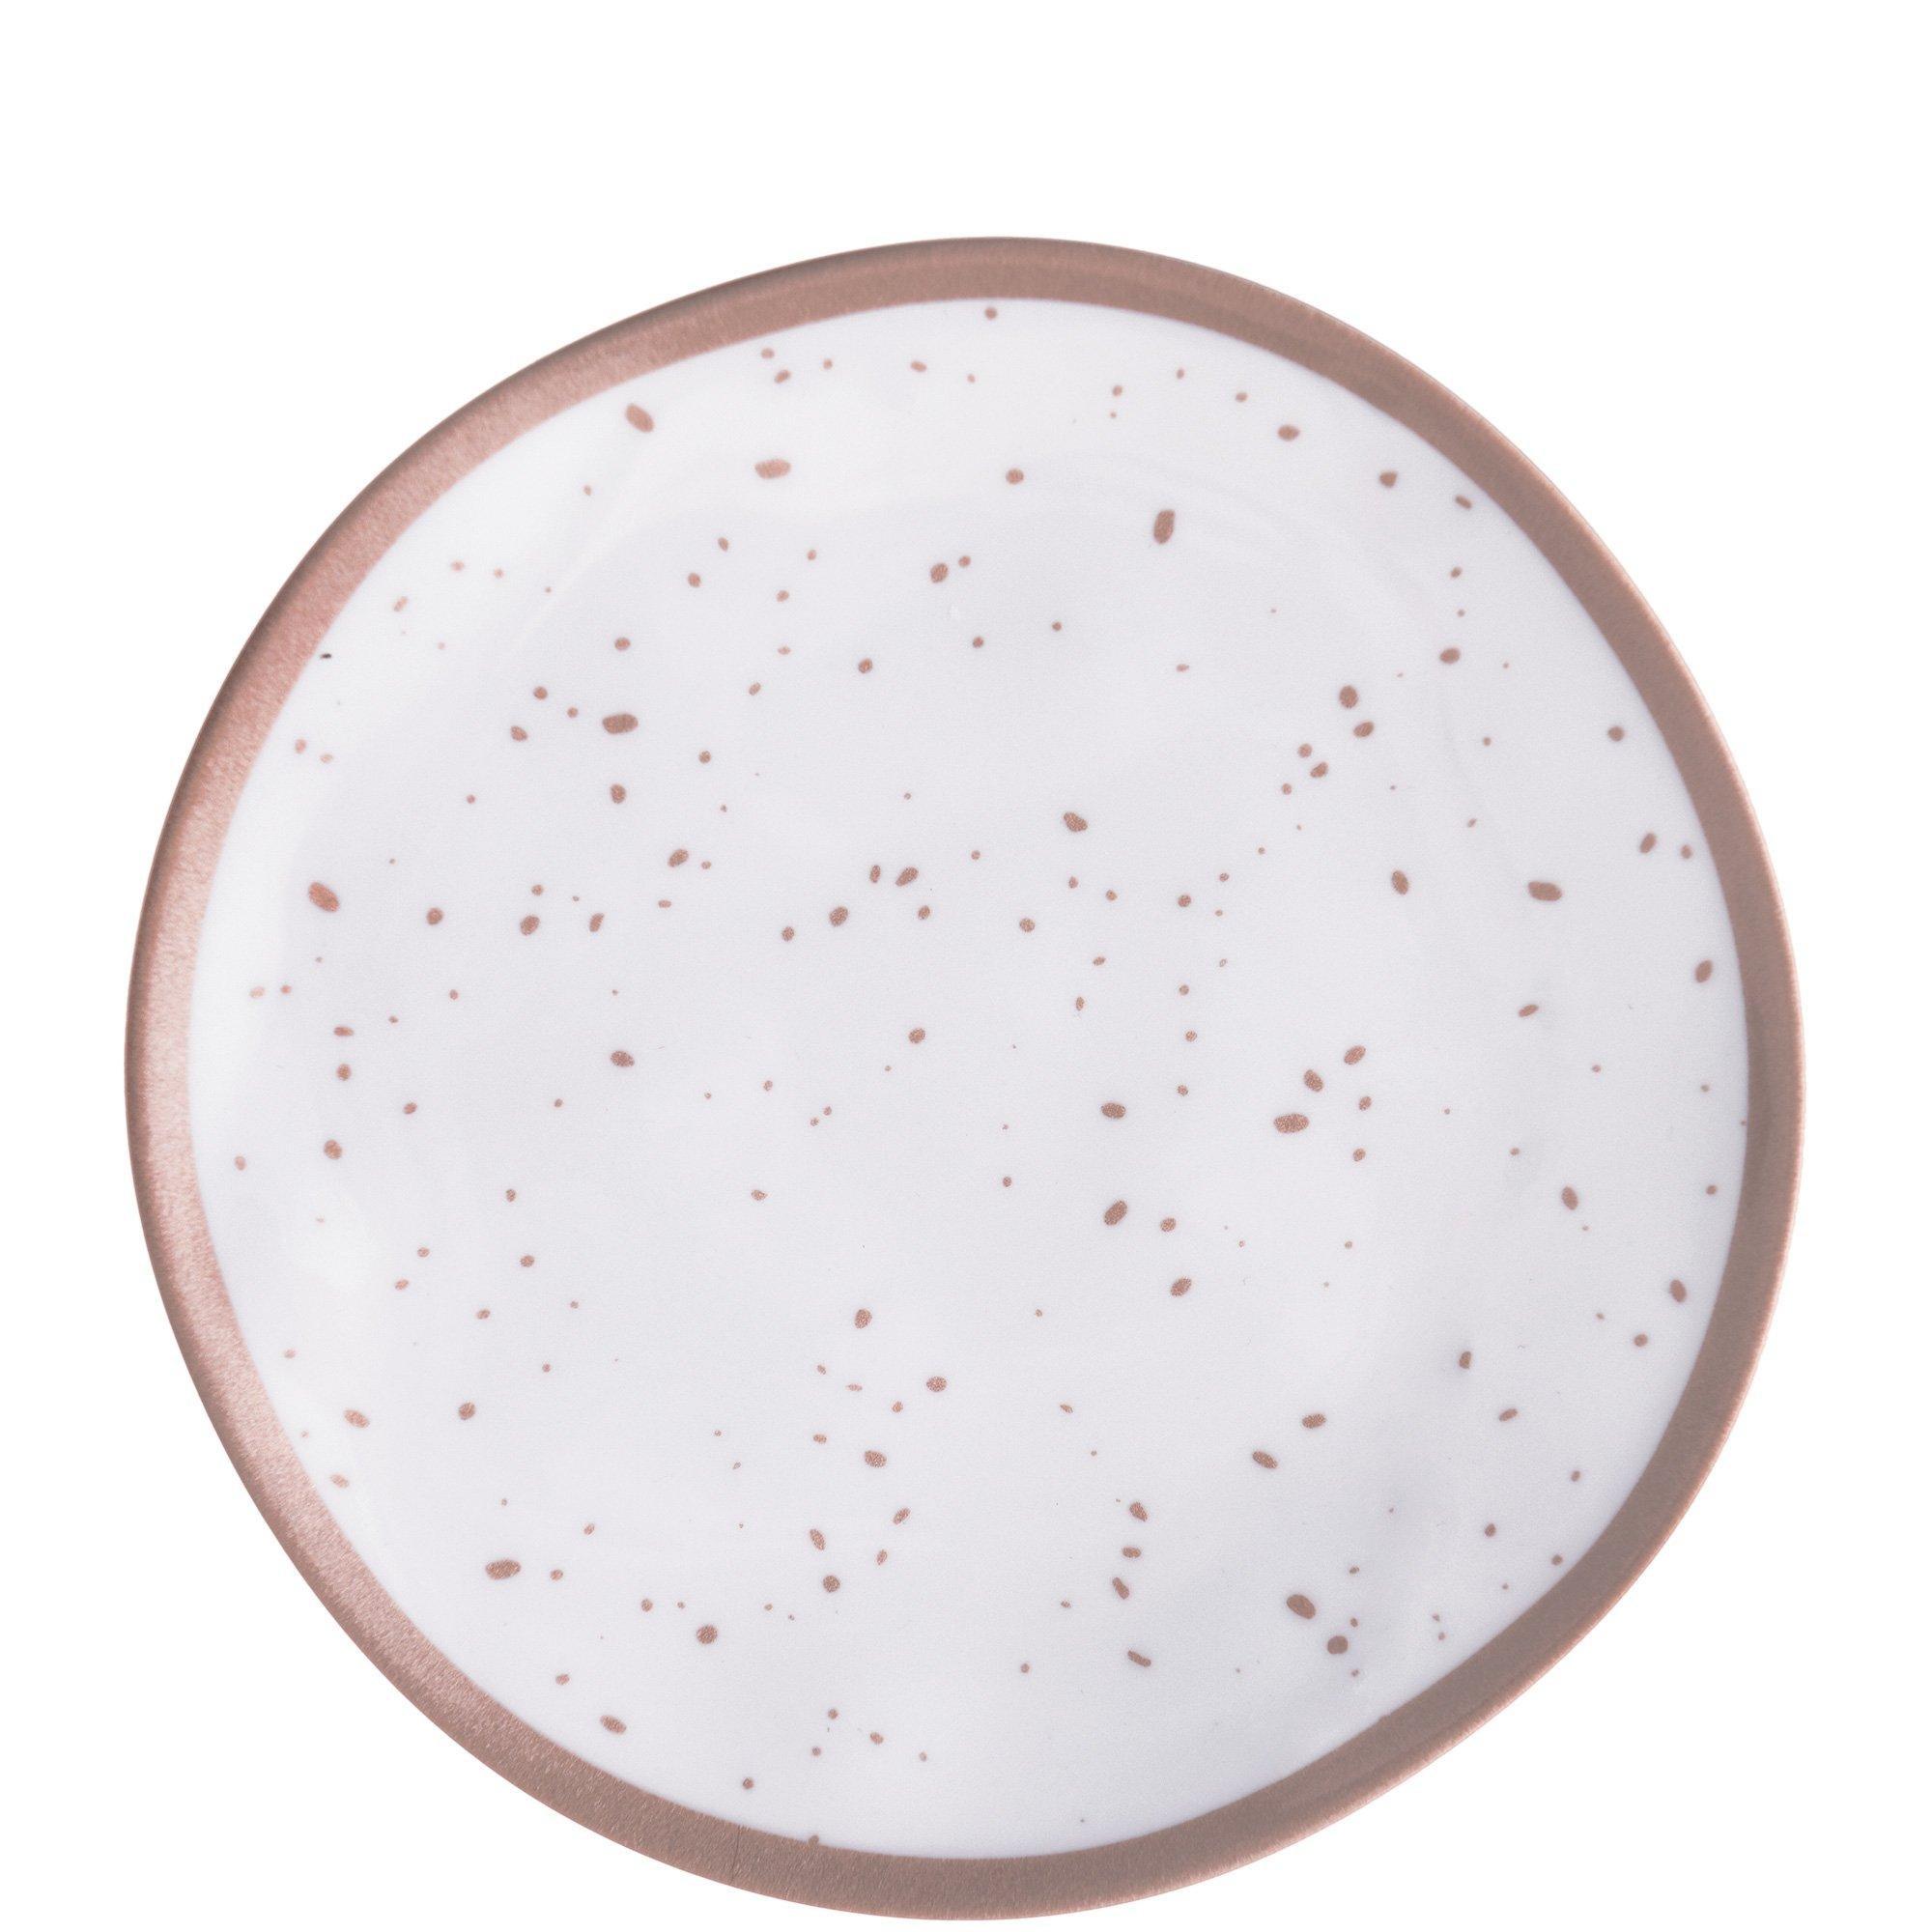 White With Speckles Melamine Dessert Plate, 8.3in